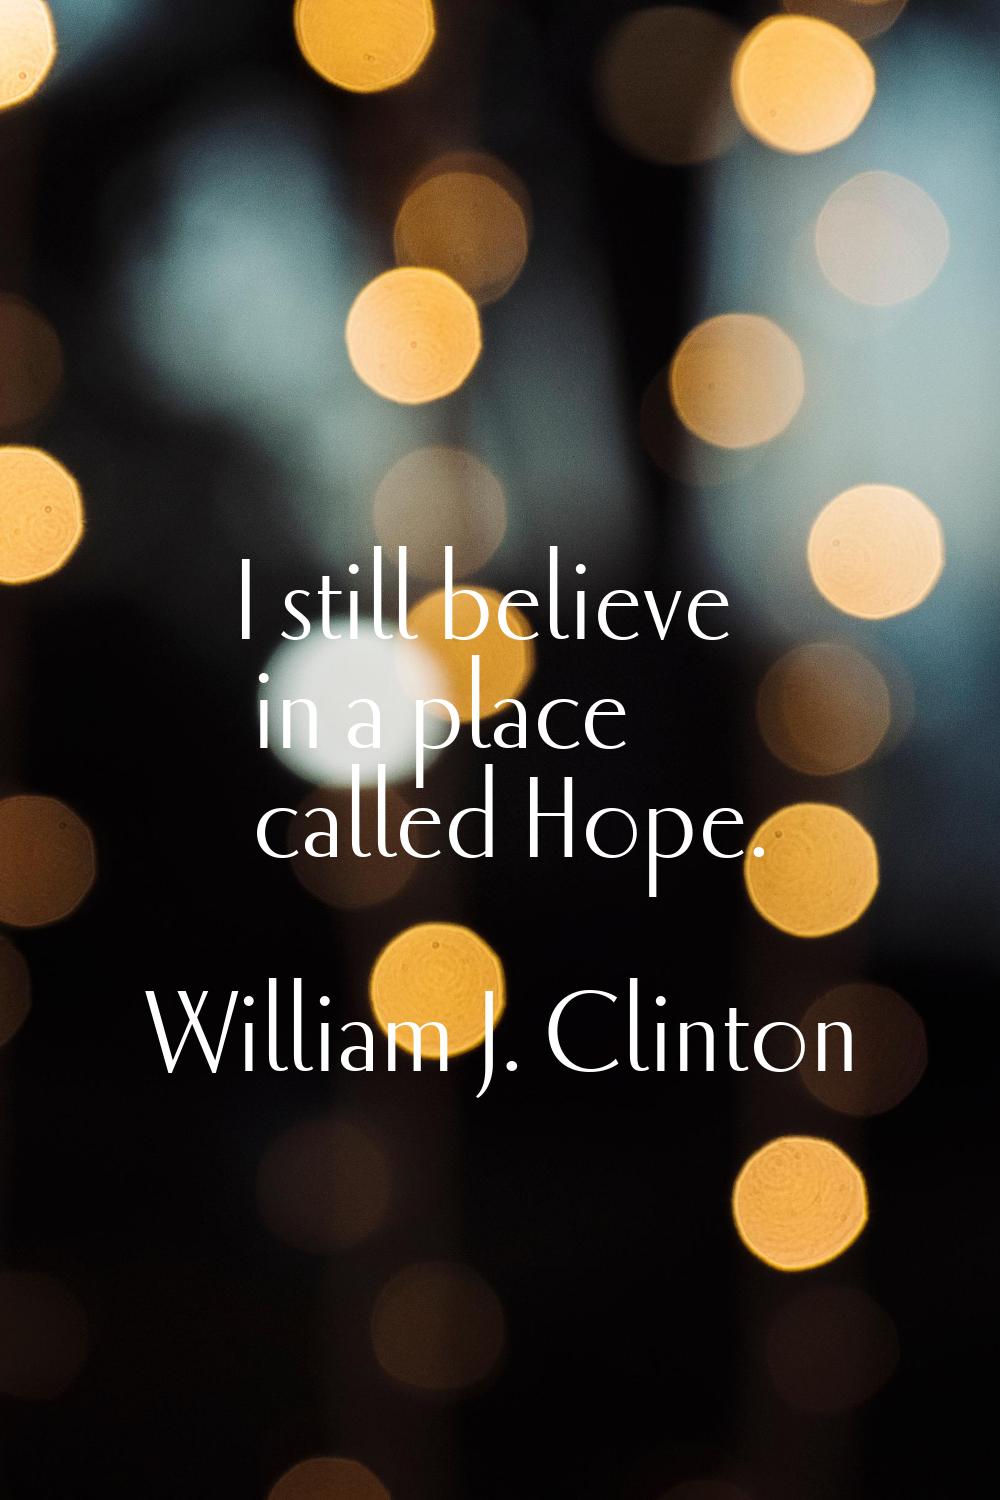 I still believe in a place called Hope.